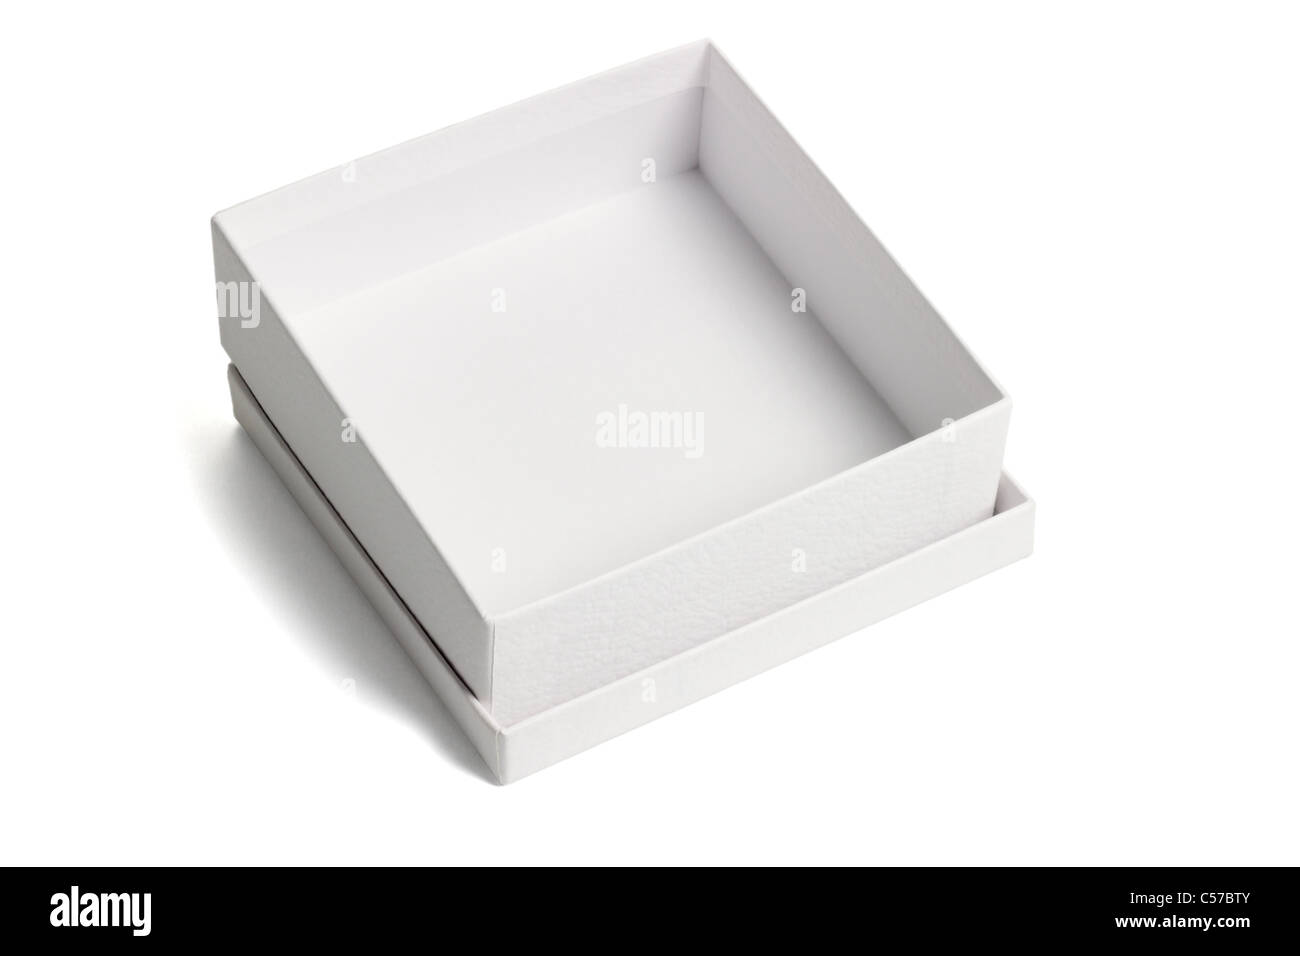 Open empty white gift box with lid on isolated background Stock Photo